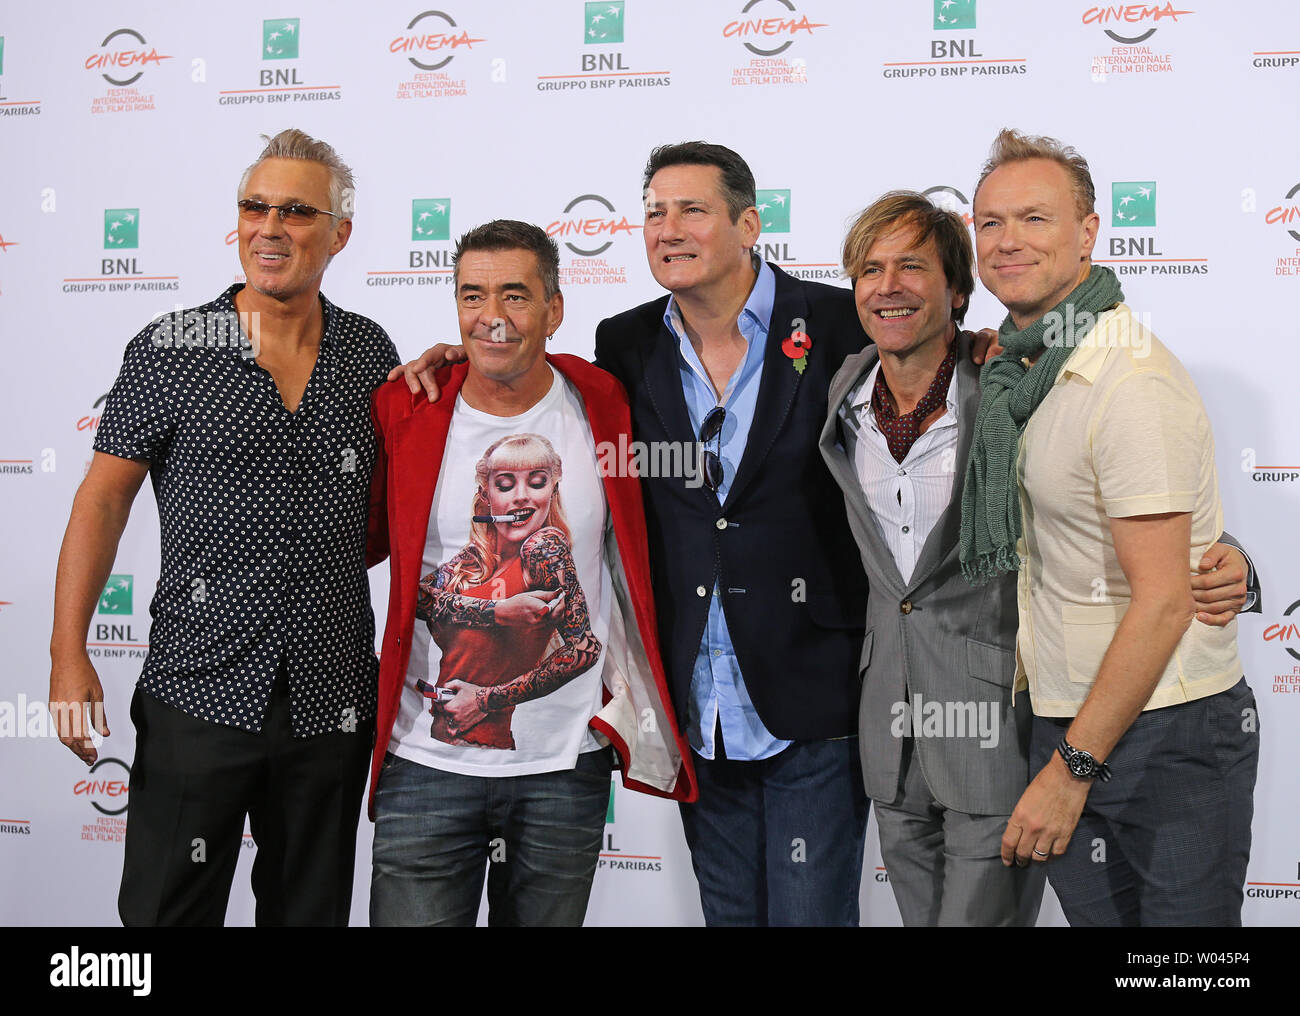 (From L to R) Martin Kemp, John Keeble, Tony Hadley, Steve Norman and Gary Kemp of Spandau Ballet arrive at a photo call for the film 'Soul Boys of the Western World' during the 9th annual Rome International Film Festival in Rome on October 20, 2014.   UPI/David Silpa Stock Photo